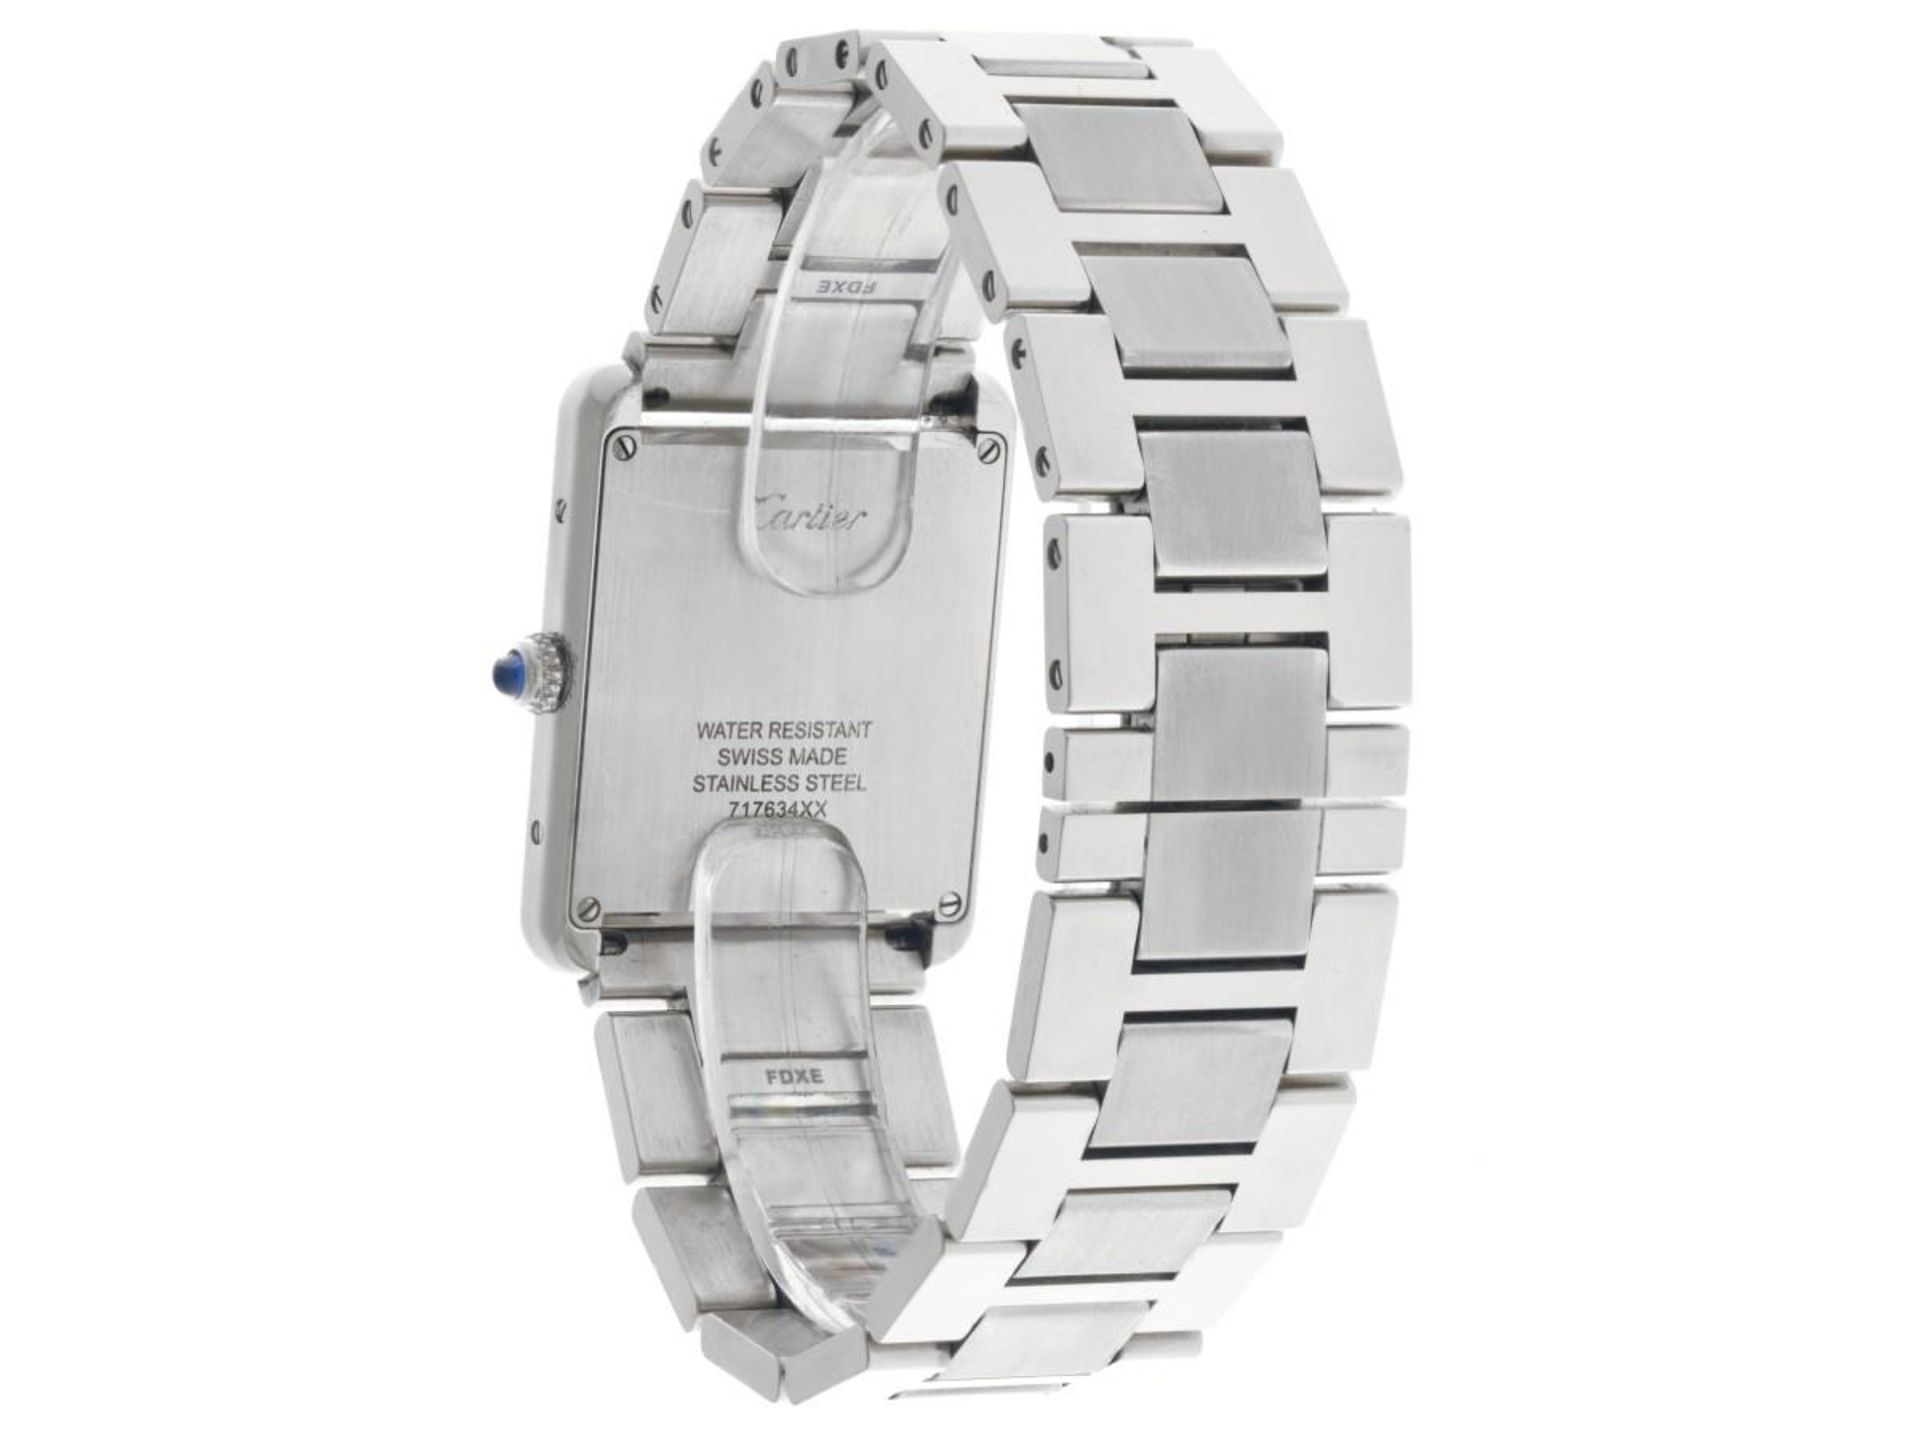 Cartier Tank Solo 3169 - Men's watch - approx. 2015. - Image 6 of 12